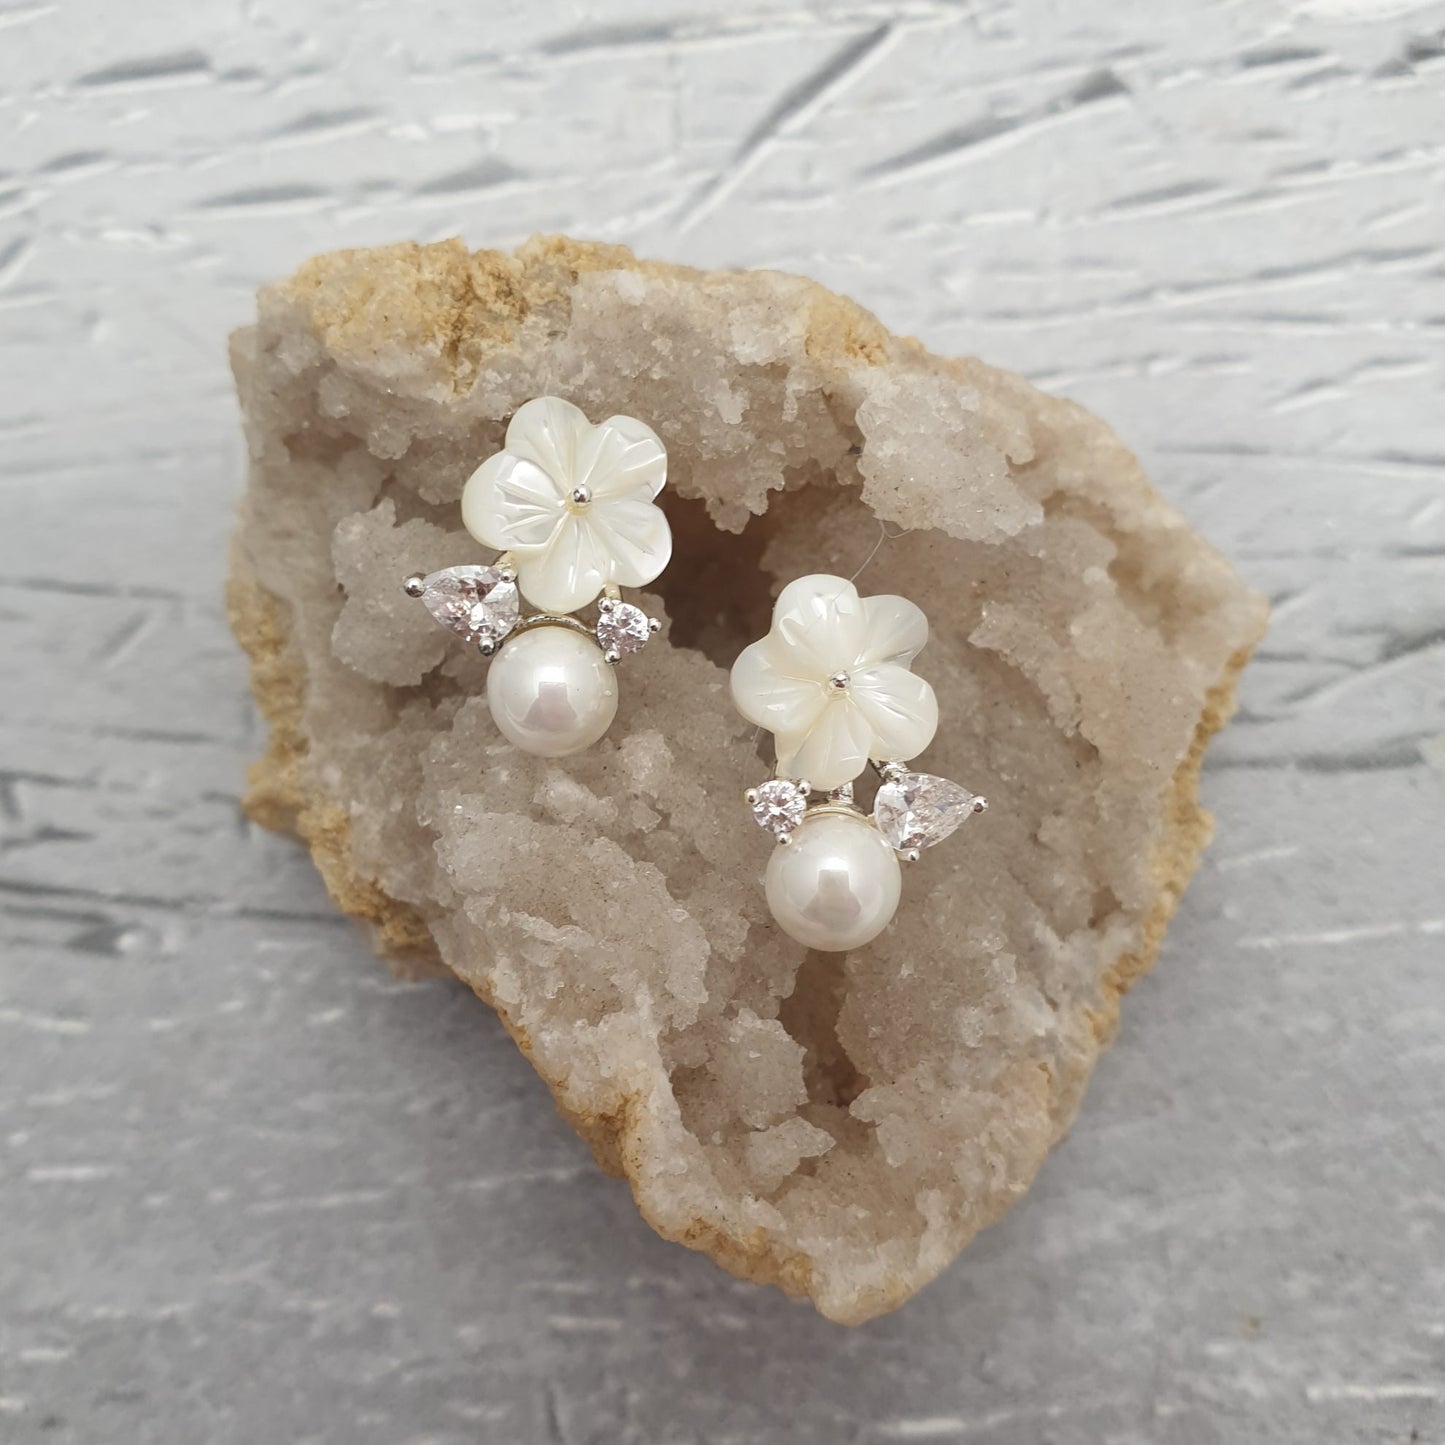 Mother of Pearl Earrings featuring dainty flowers with diamante crystal leaves set a top a creamy freshwater pearl